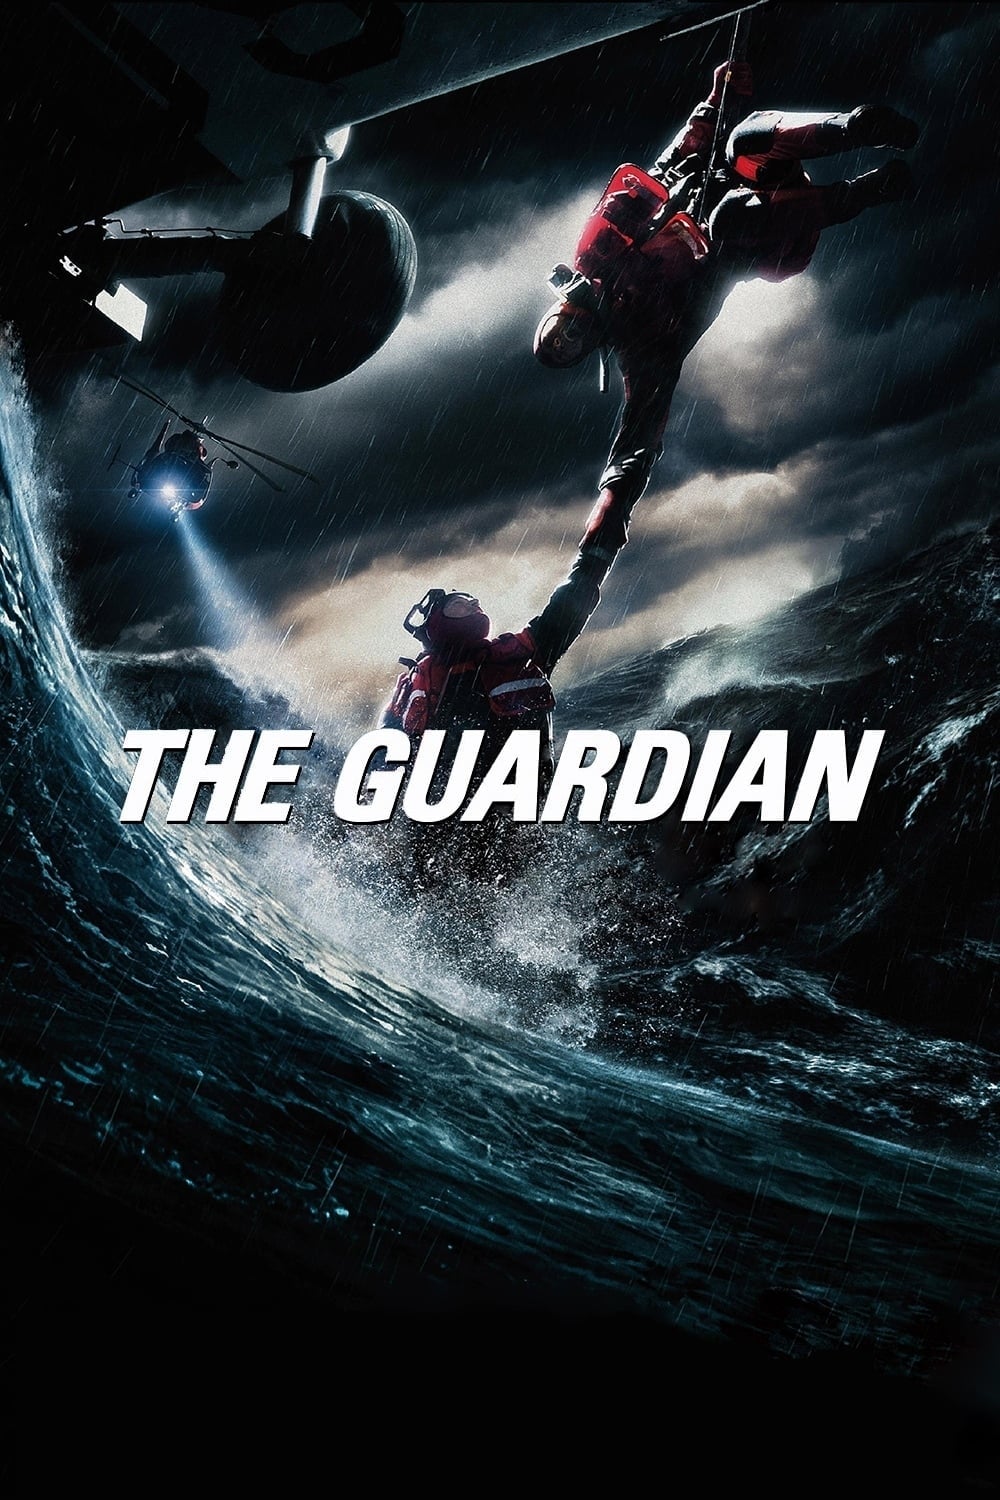 The Guardian (2006)